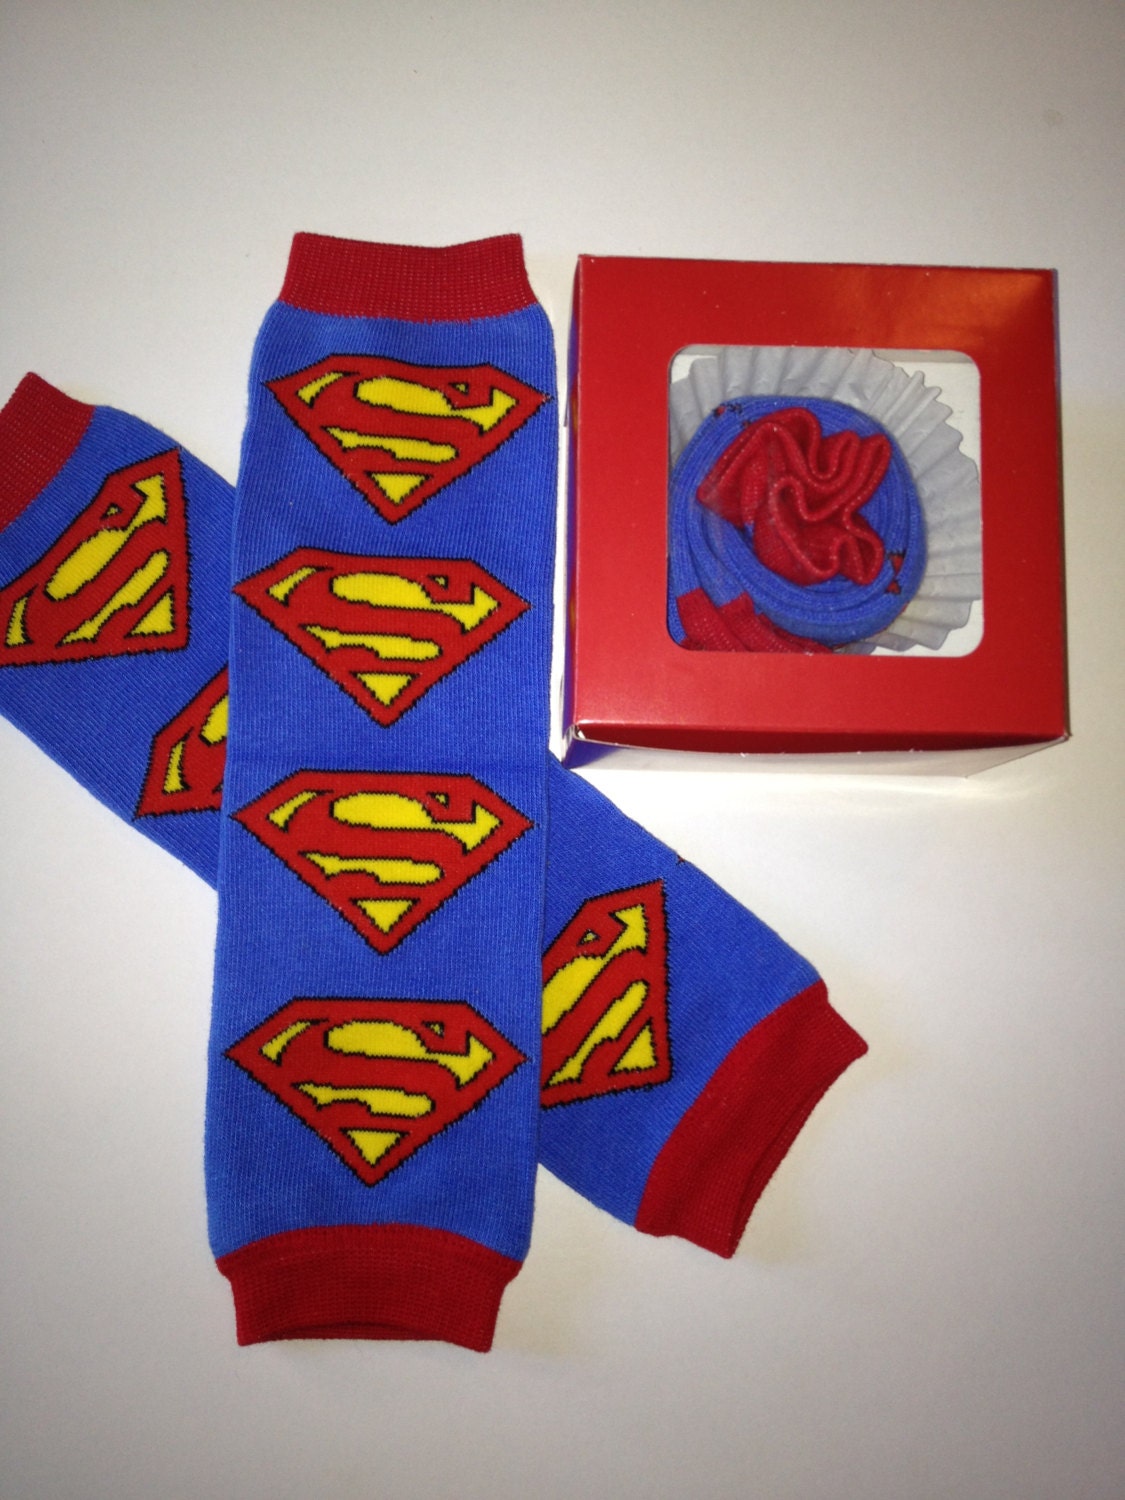 Blue And Red Superman Leg Warmers Packaged Like A Cupcake 3598